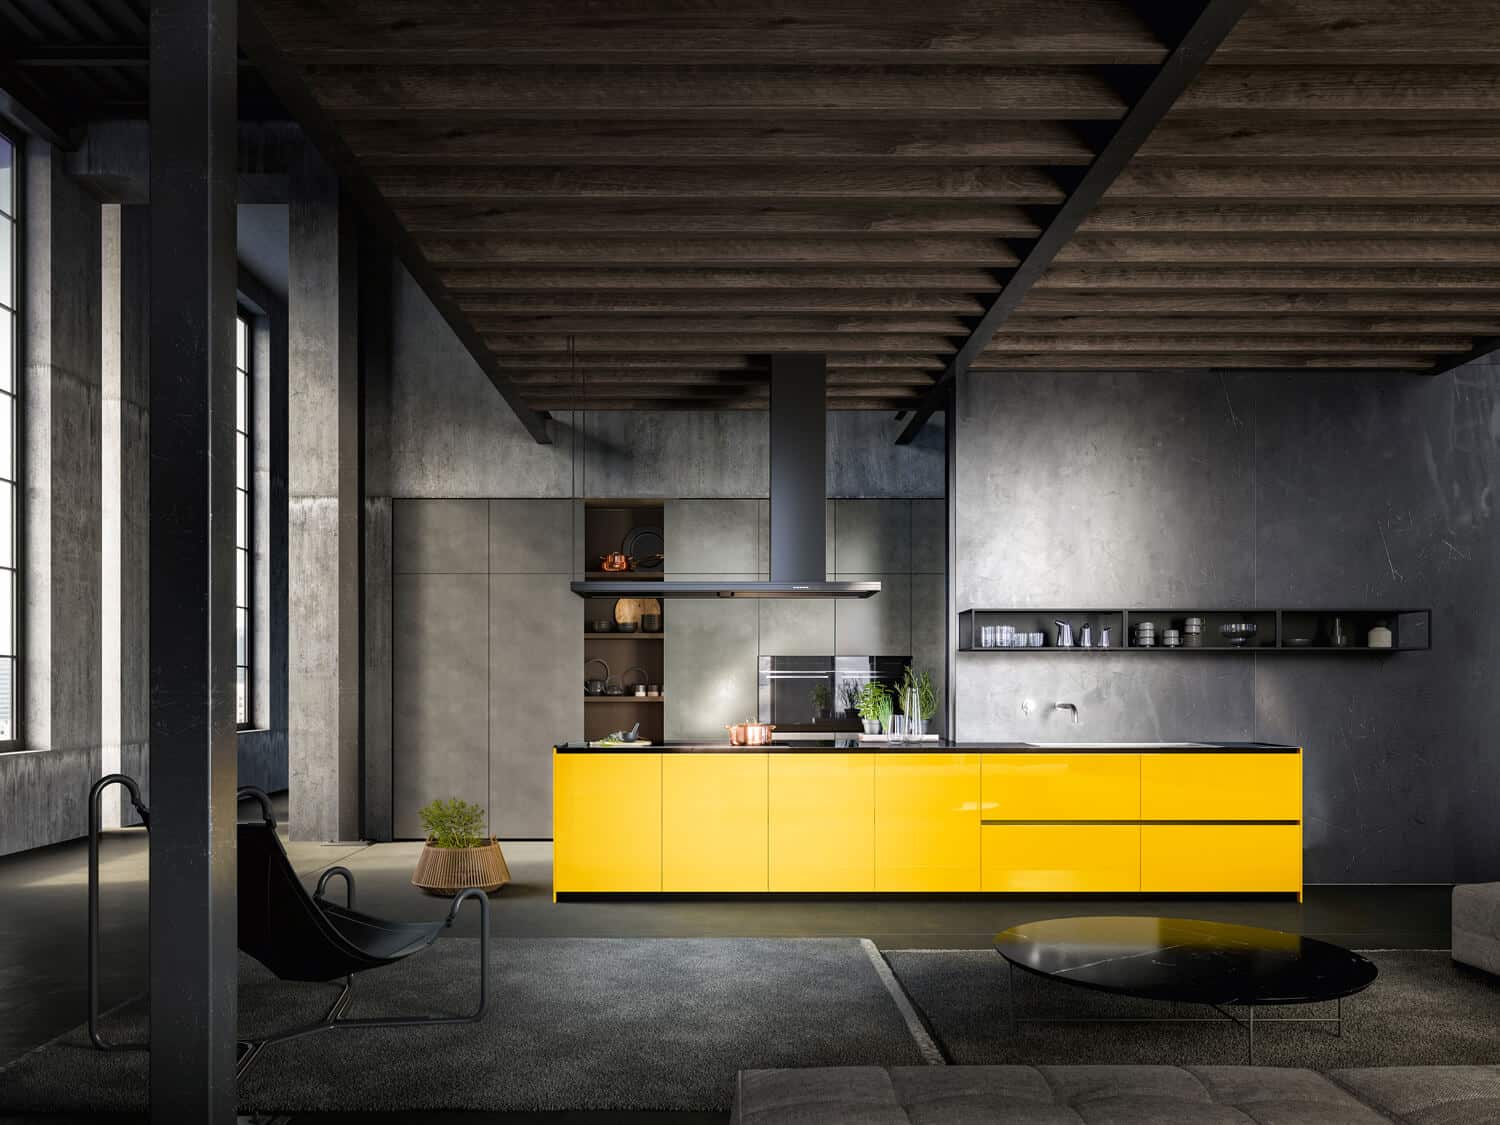 Base cabinets in Giallo Zolfo high gloss lacquer. Tall units in Ghisa Urban lacquer. Shelf boiserie in Foresta oak wood.